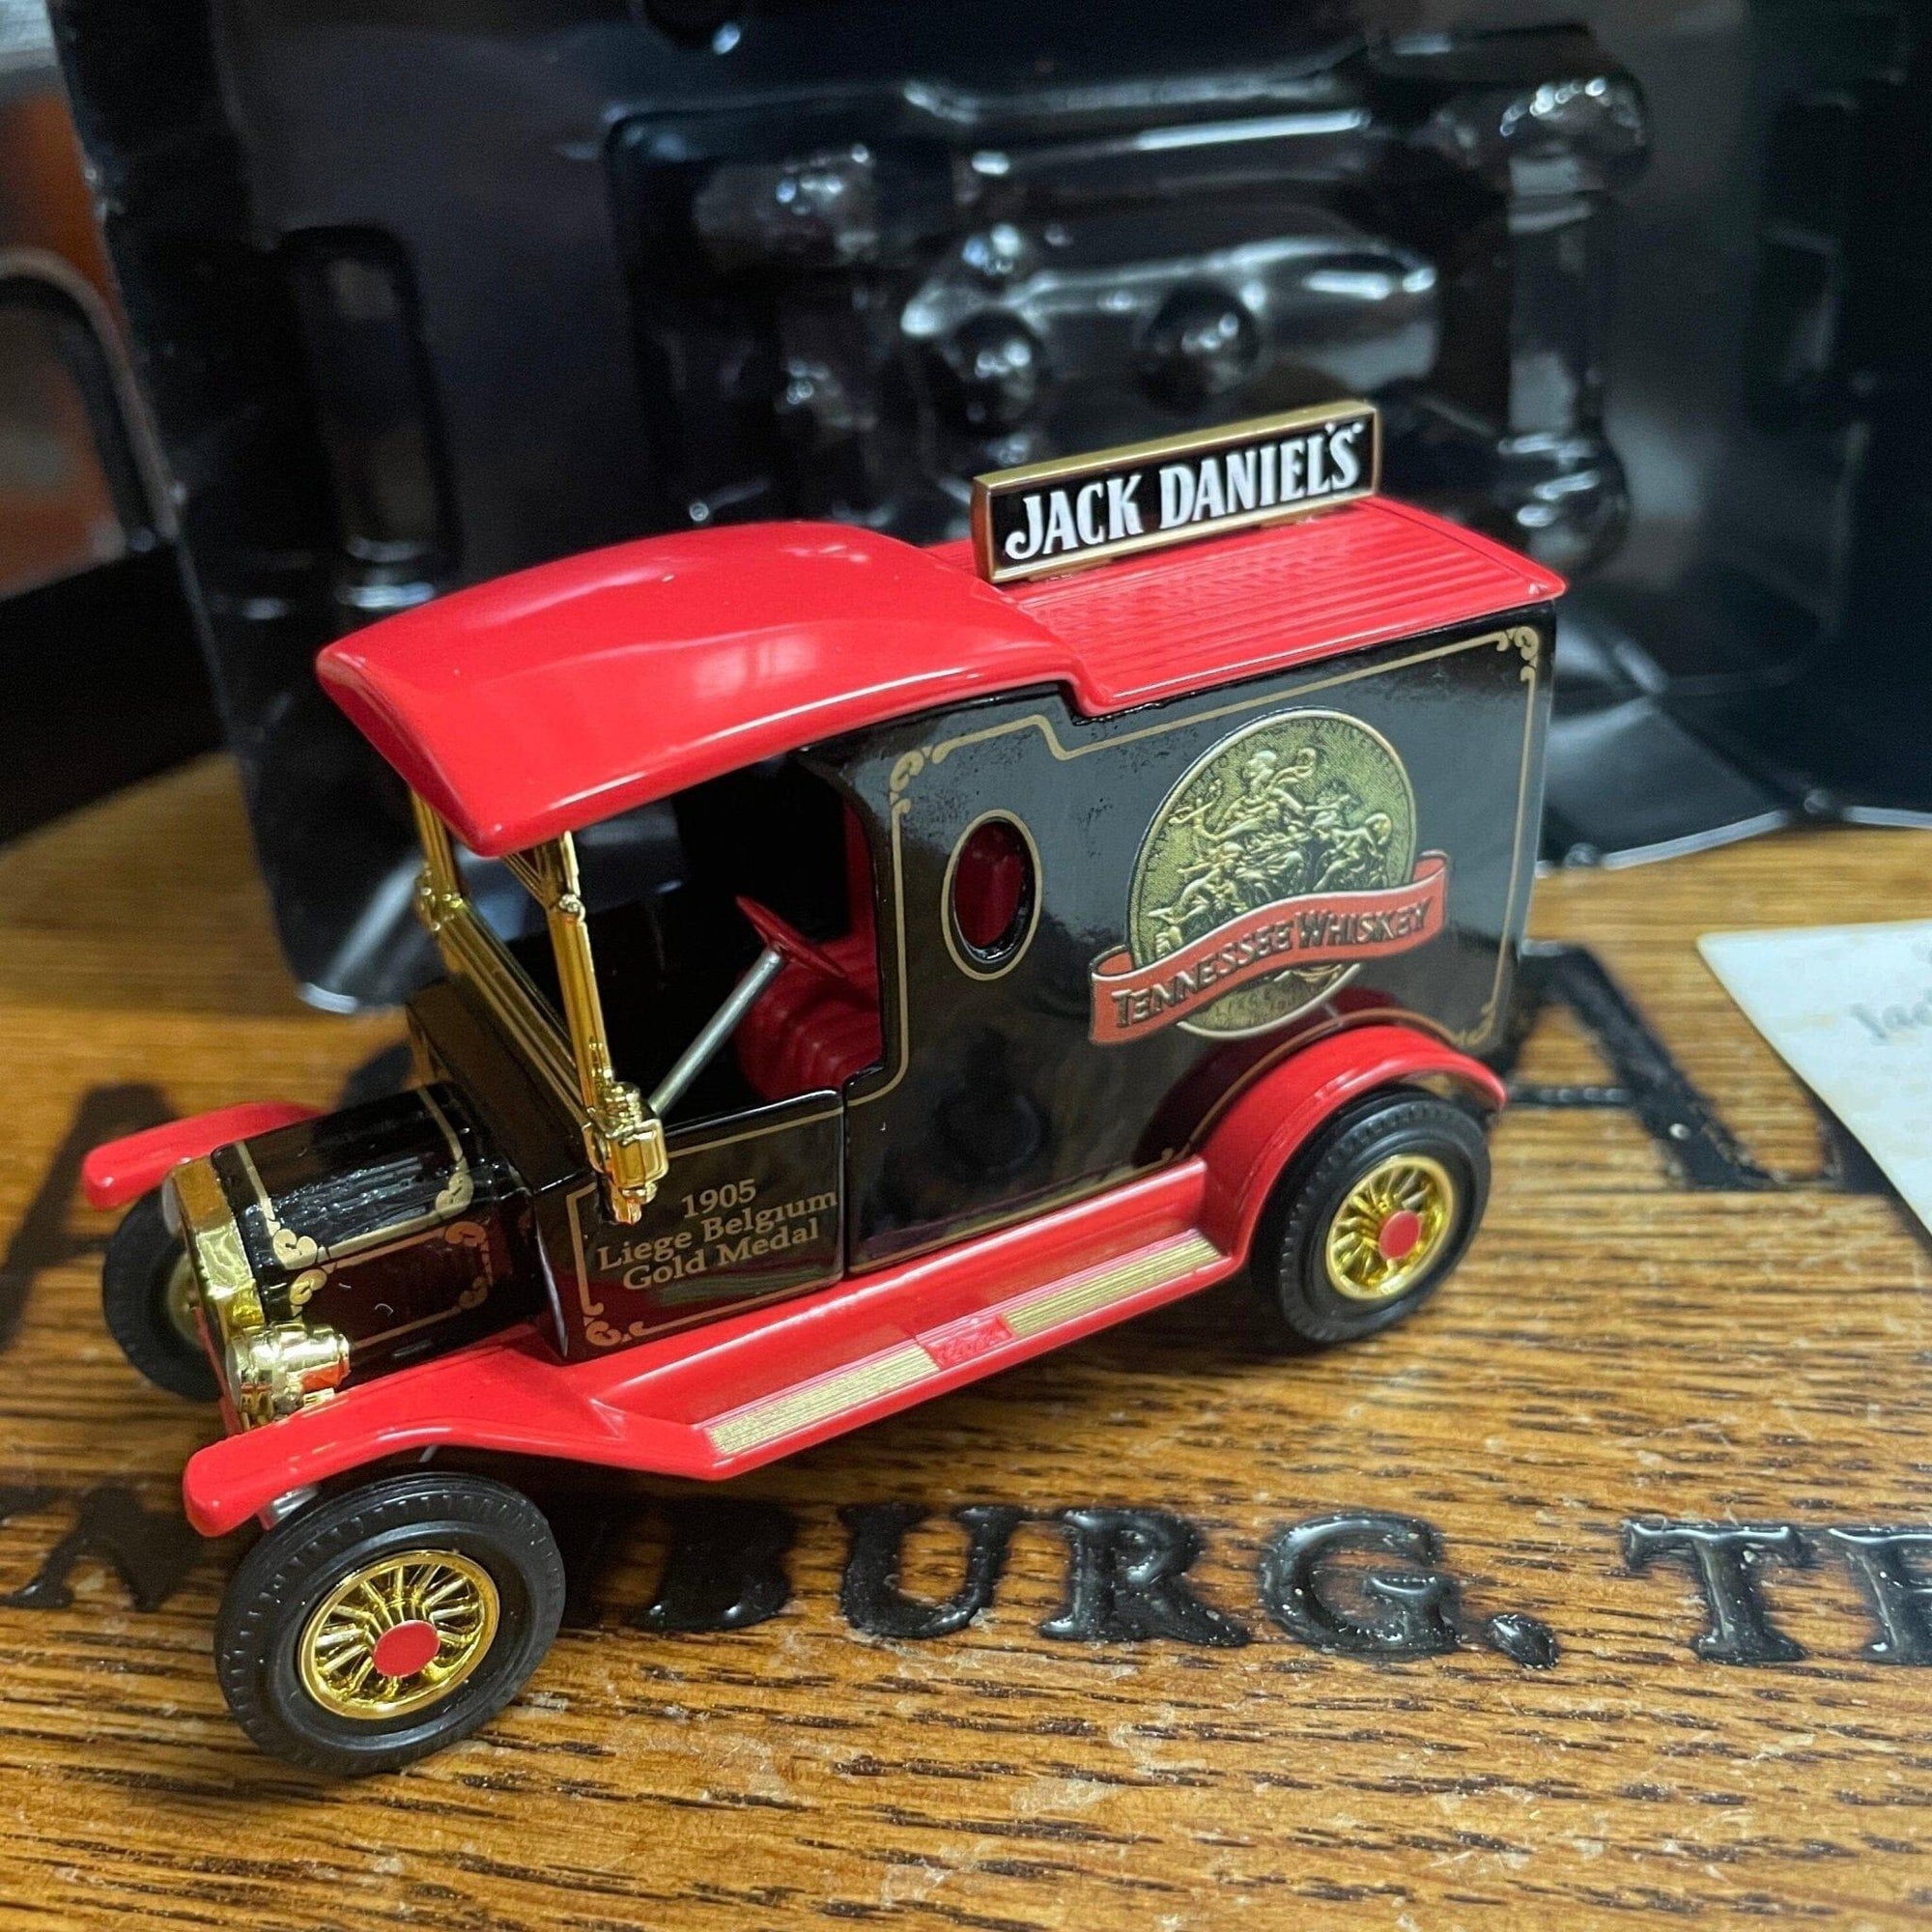 Jack Daniel’s 150th Birthday Gold Medal Matchbox Truck from 2000 - The Whiskey Cave